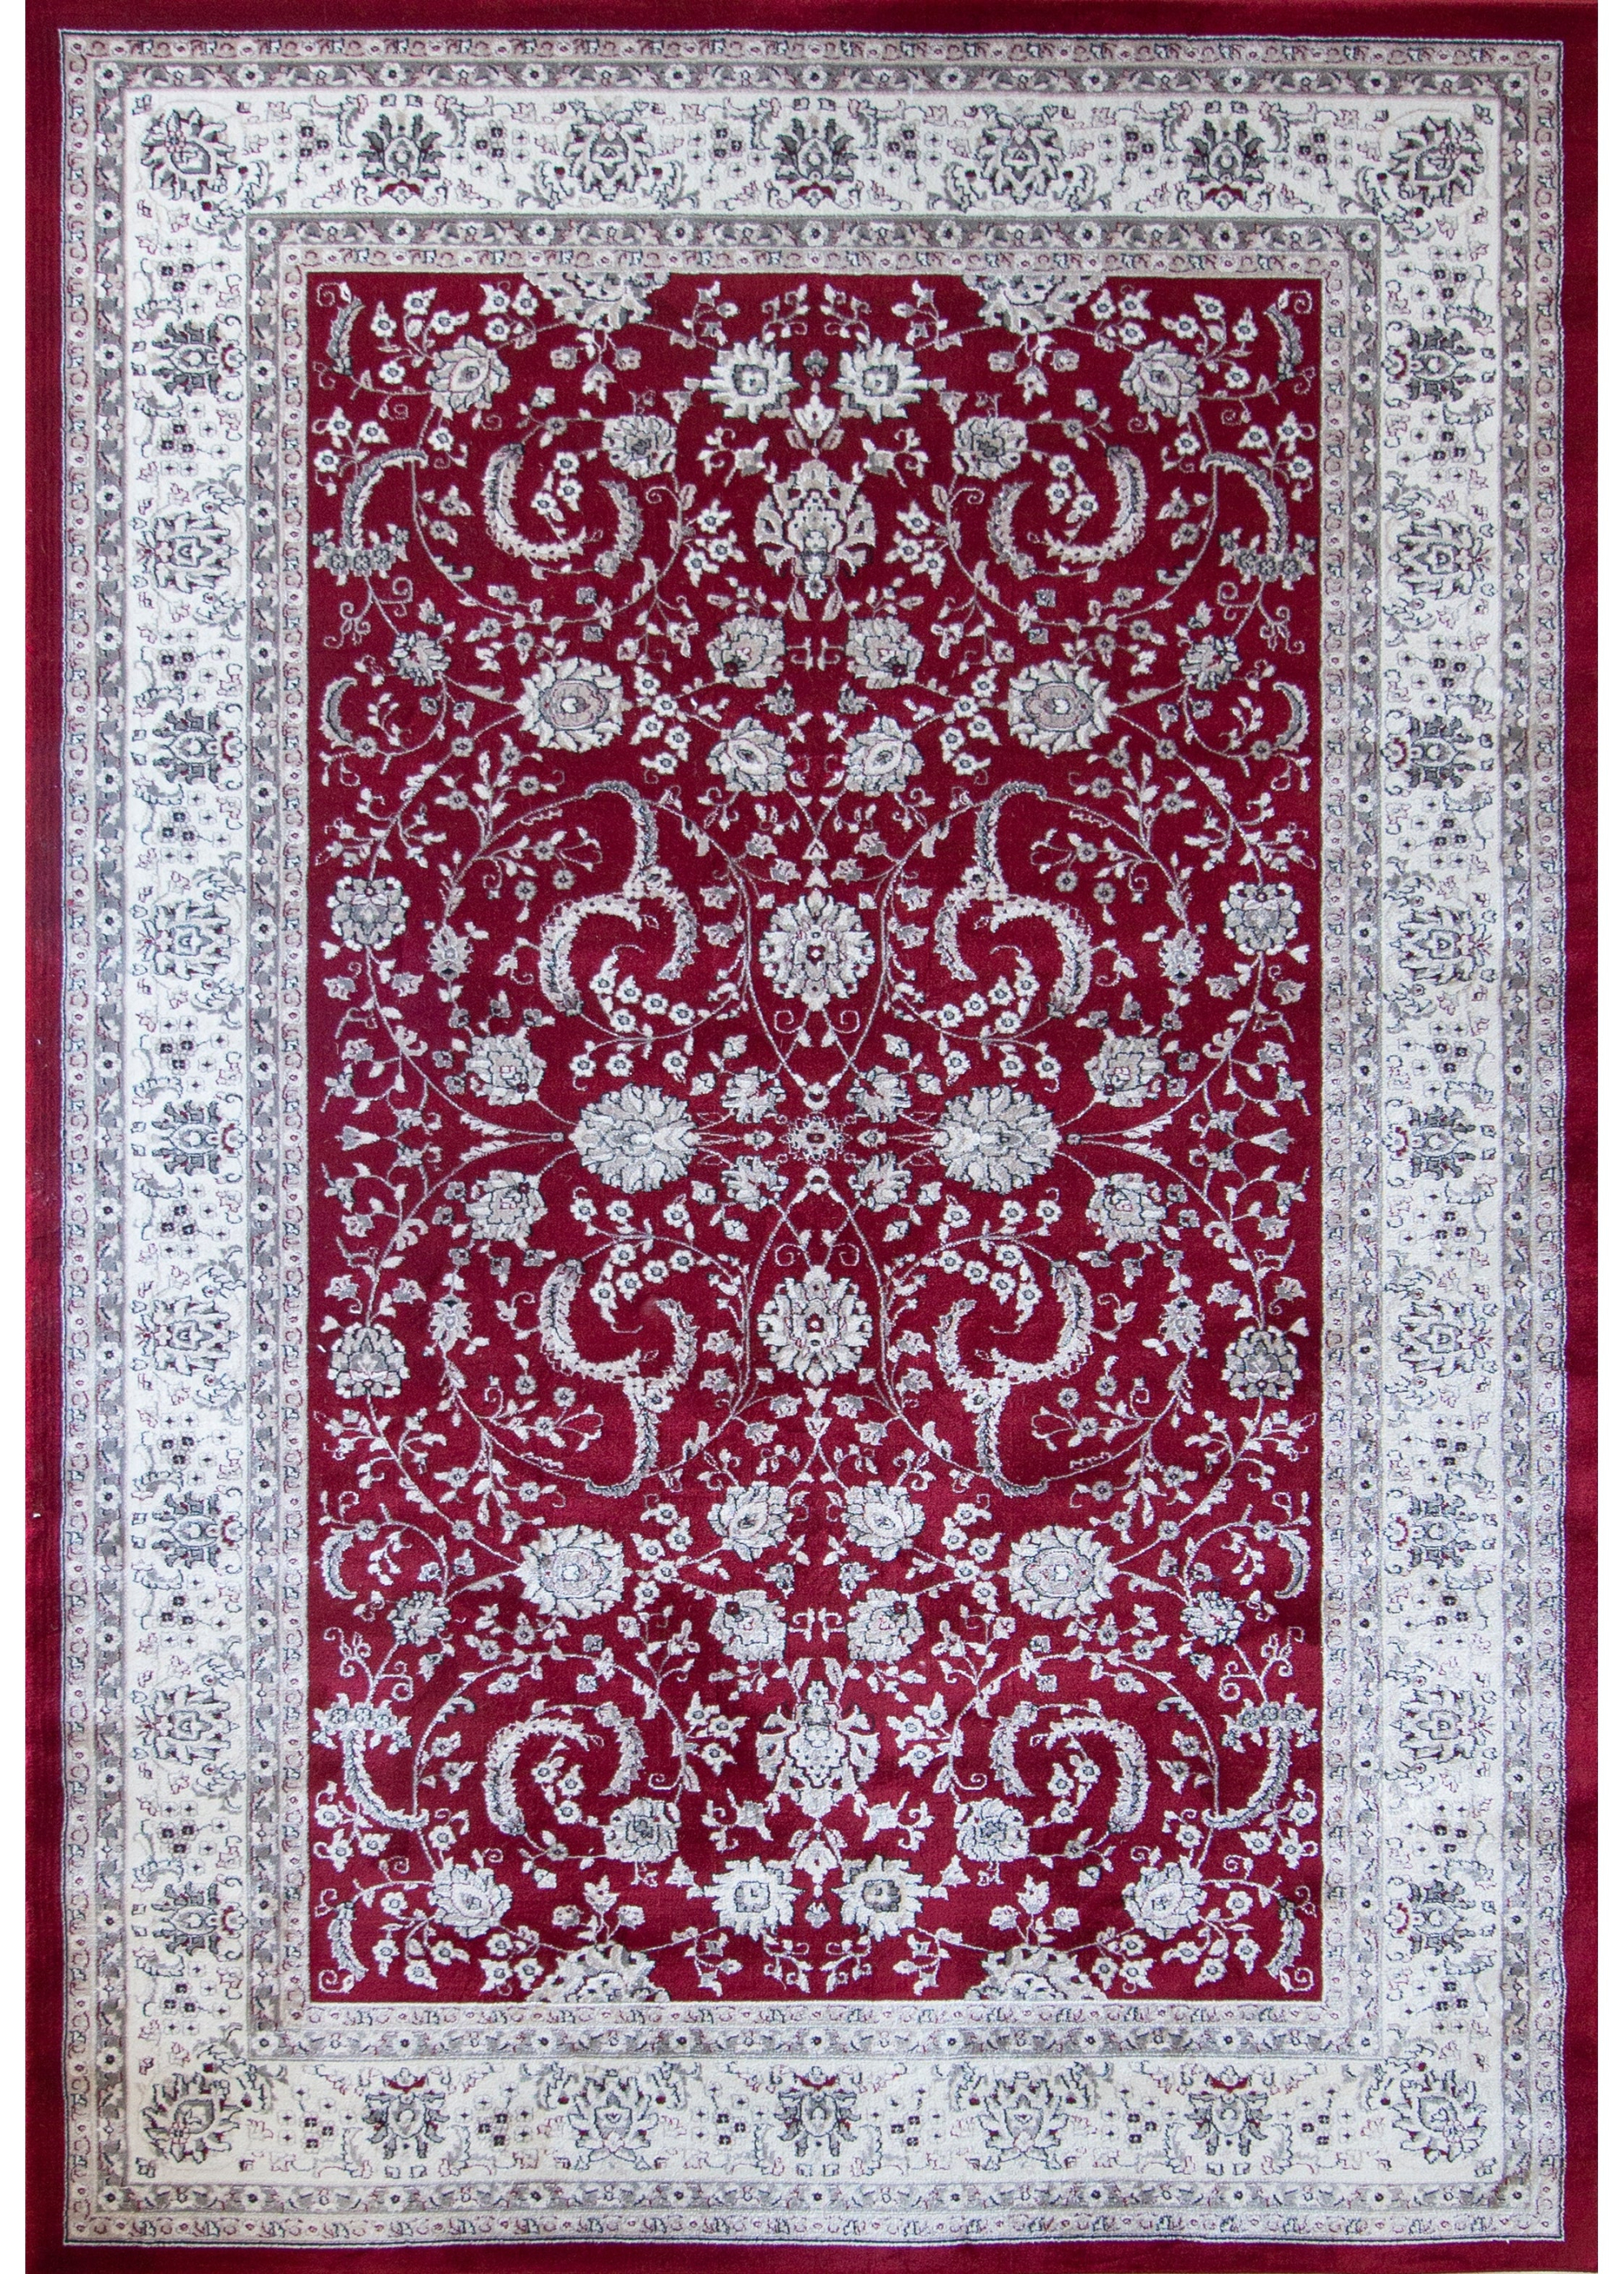 Saphire Red Loomed Rug-Area rug for living room, dining area, and bedroom